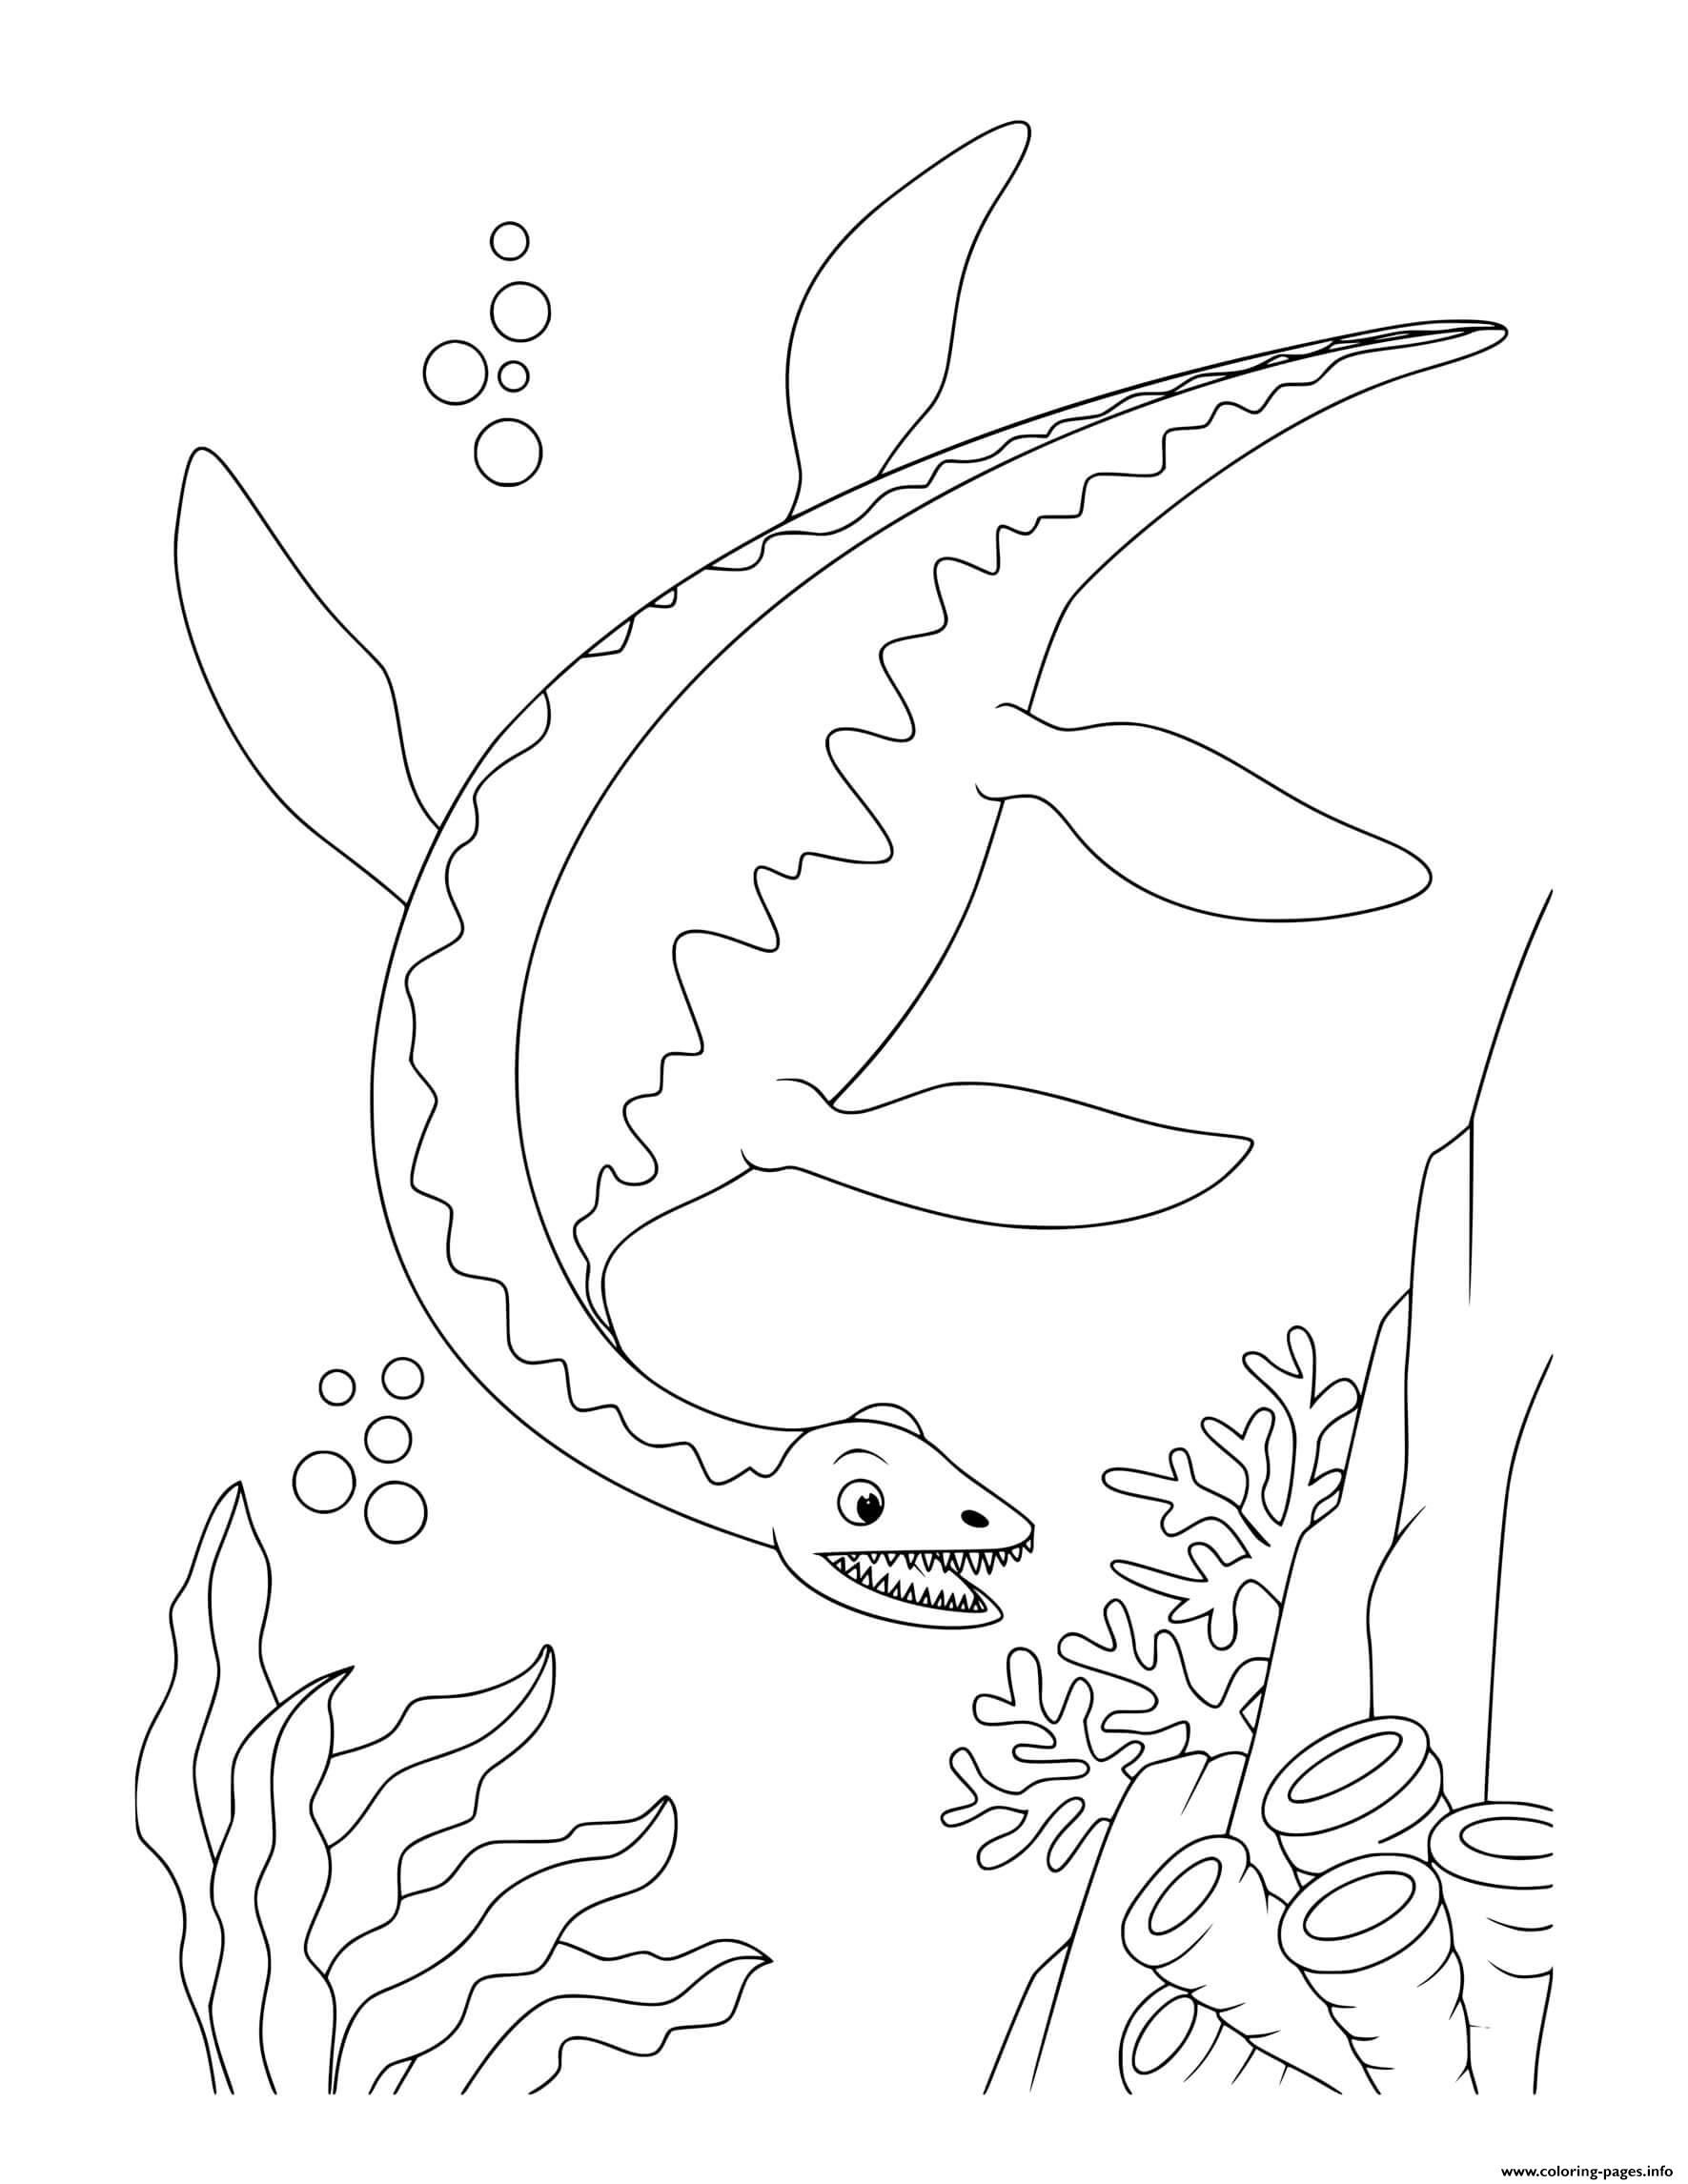 80 Printable Dinosaur Coloring Pages For Adults 84